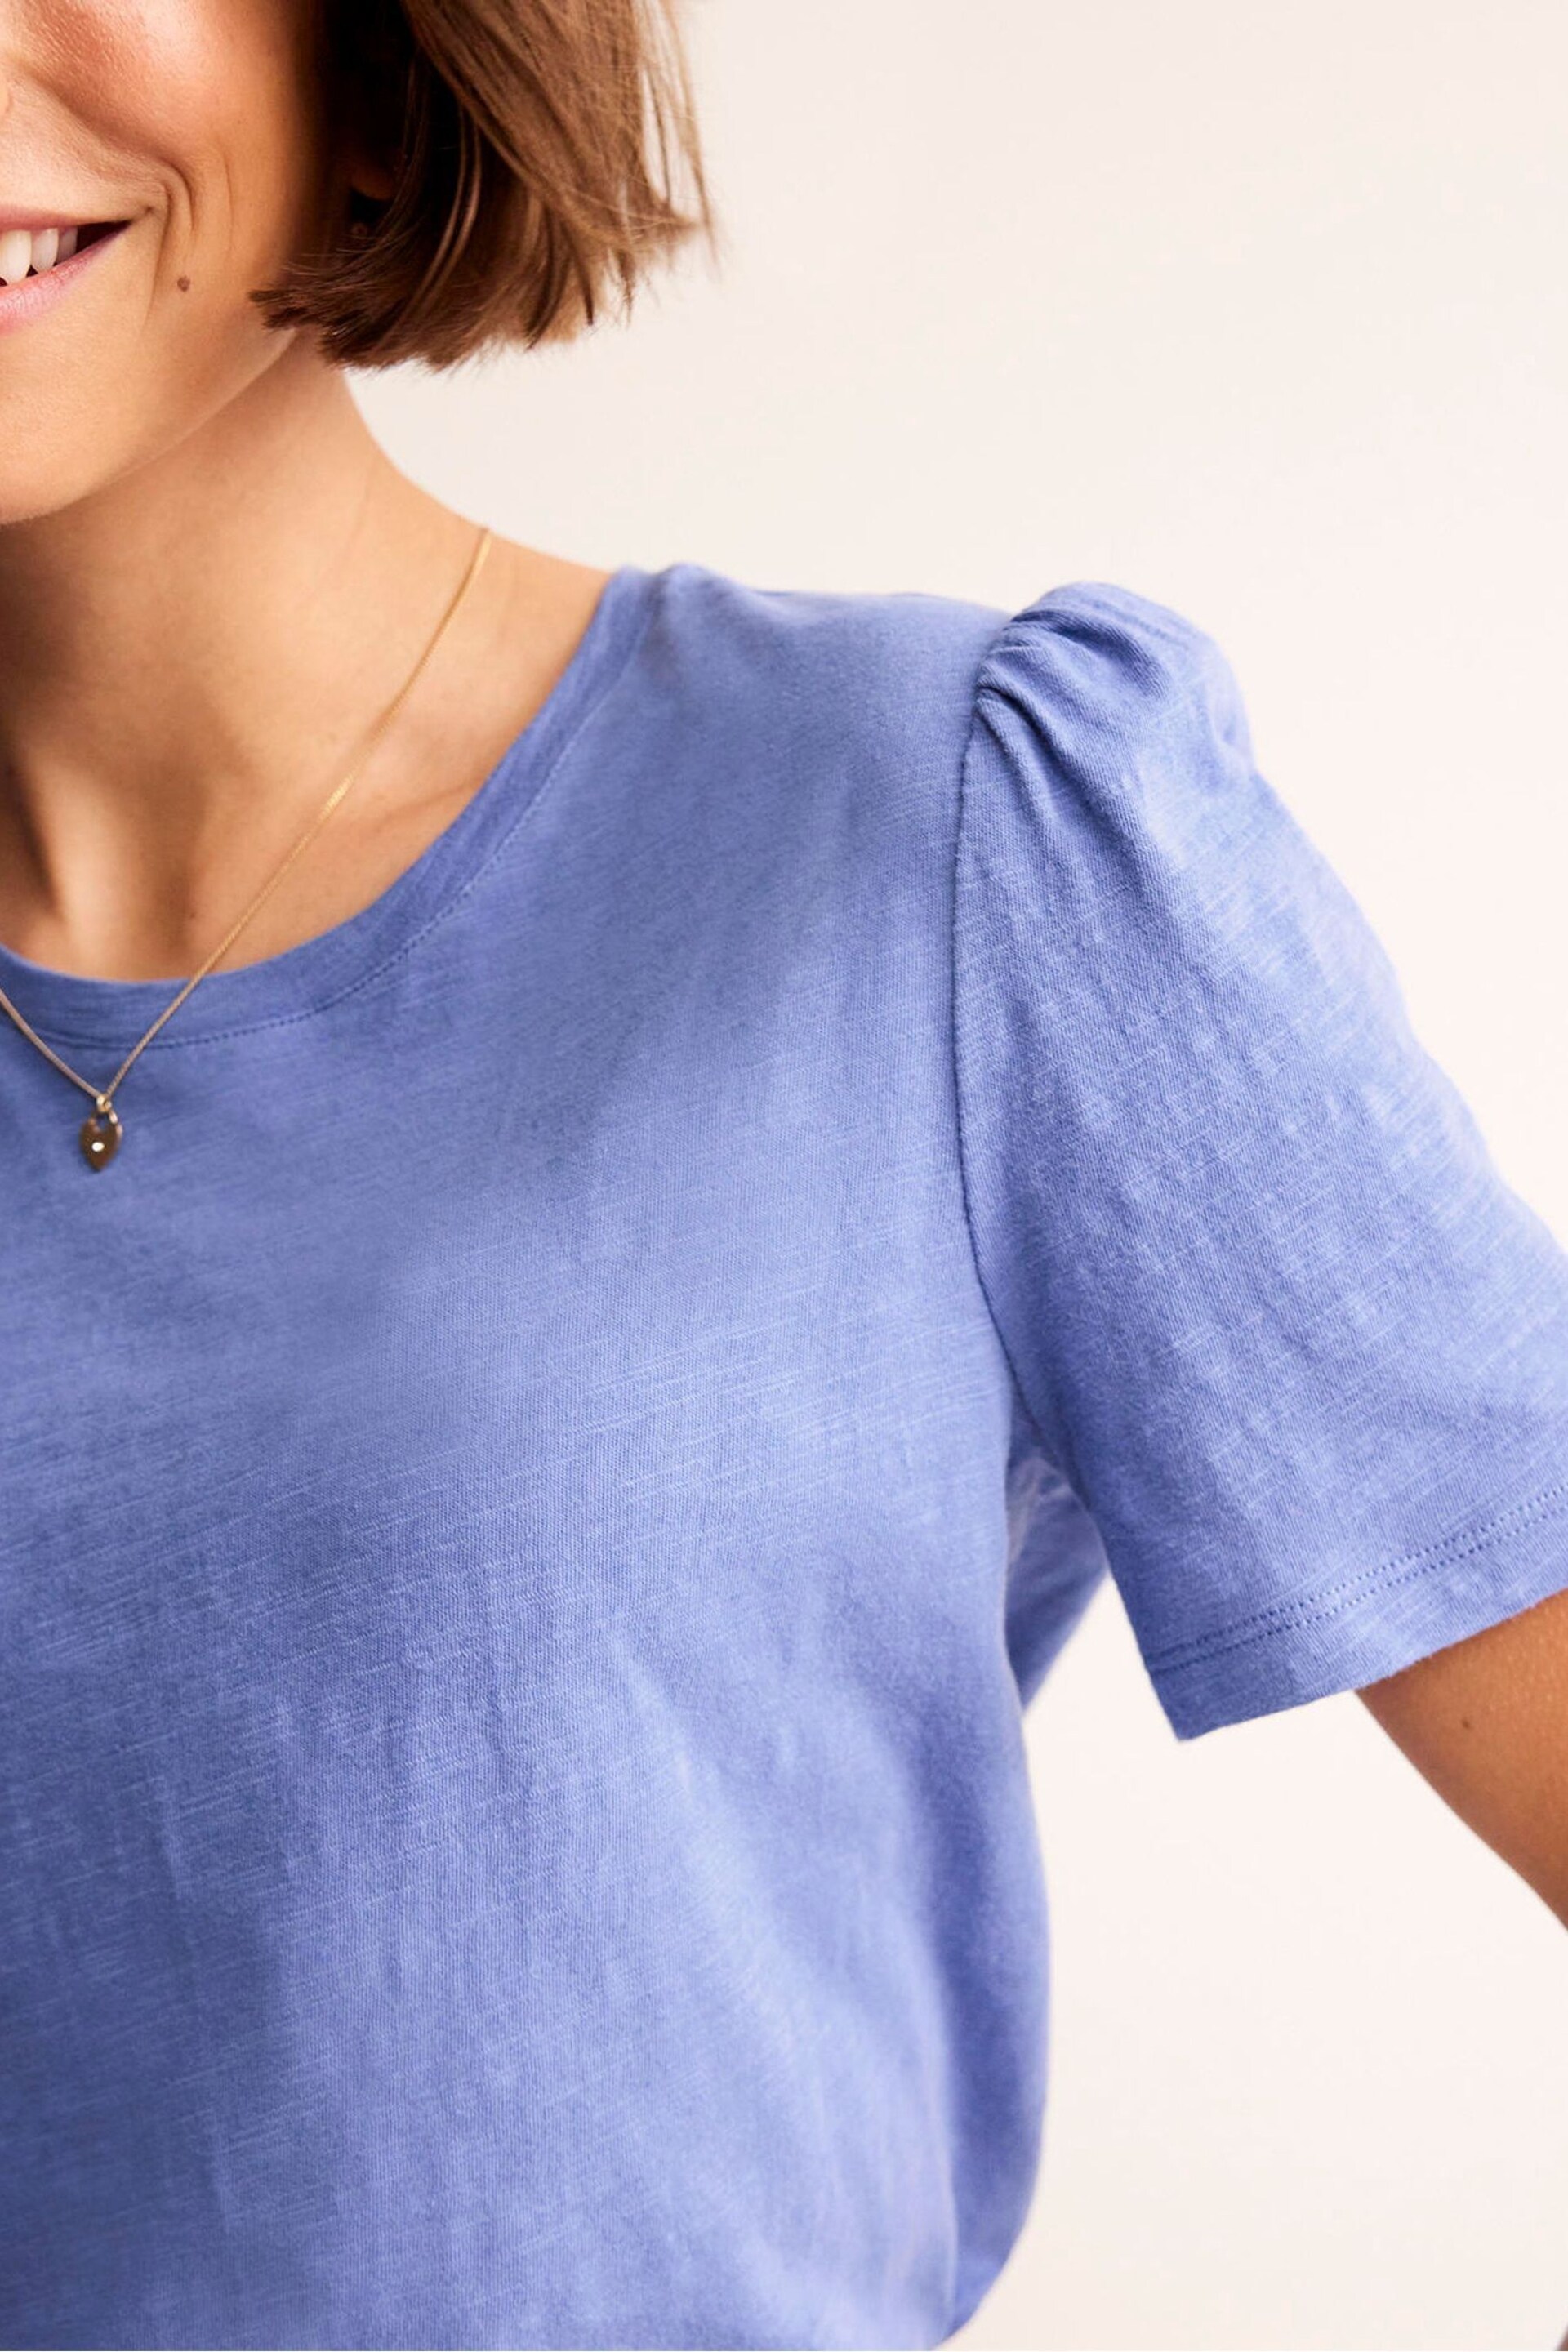 Boden Blue Cotton Puff Sleeve T-Shirt - Image 4 of 5